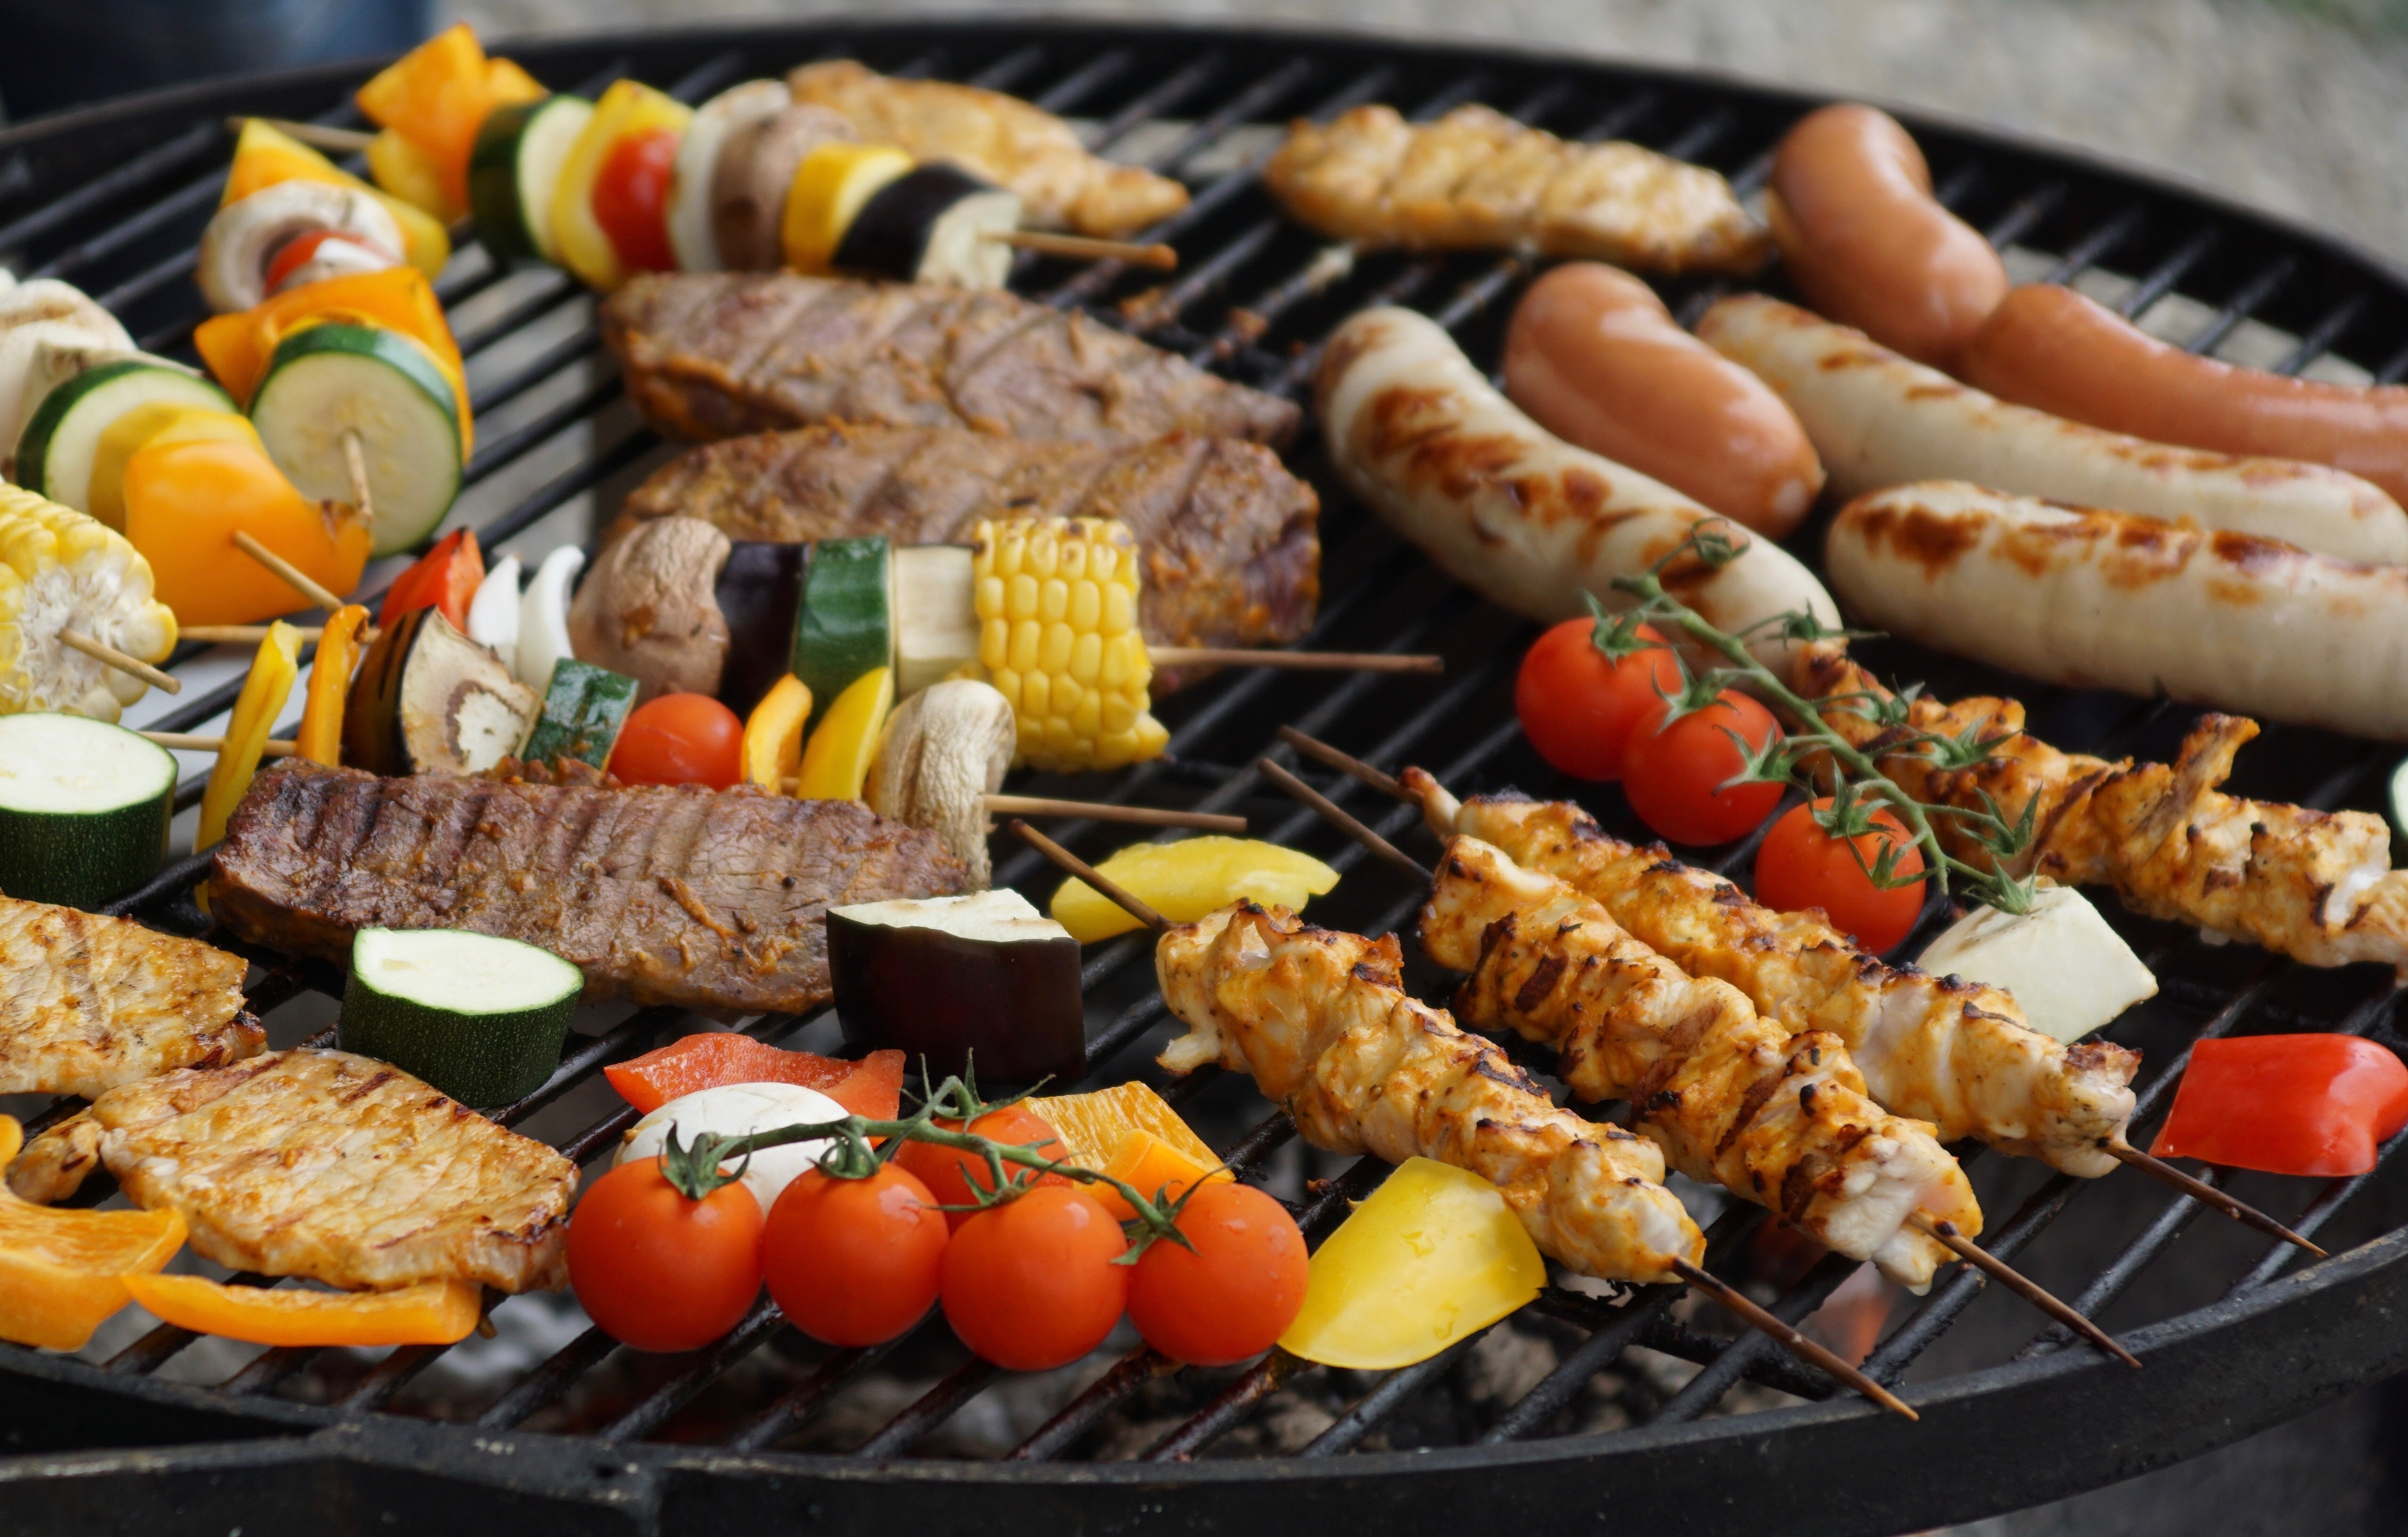 Food being grilled on a clean grill.